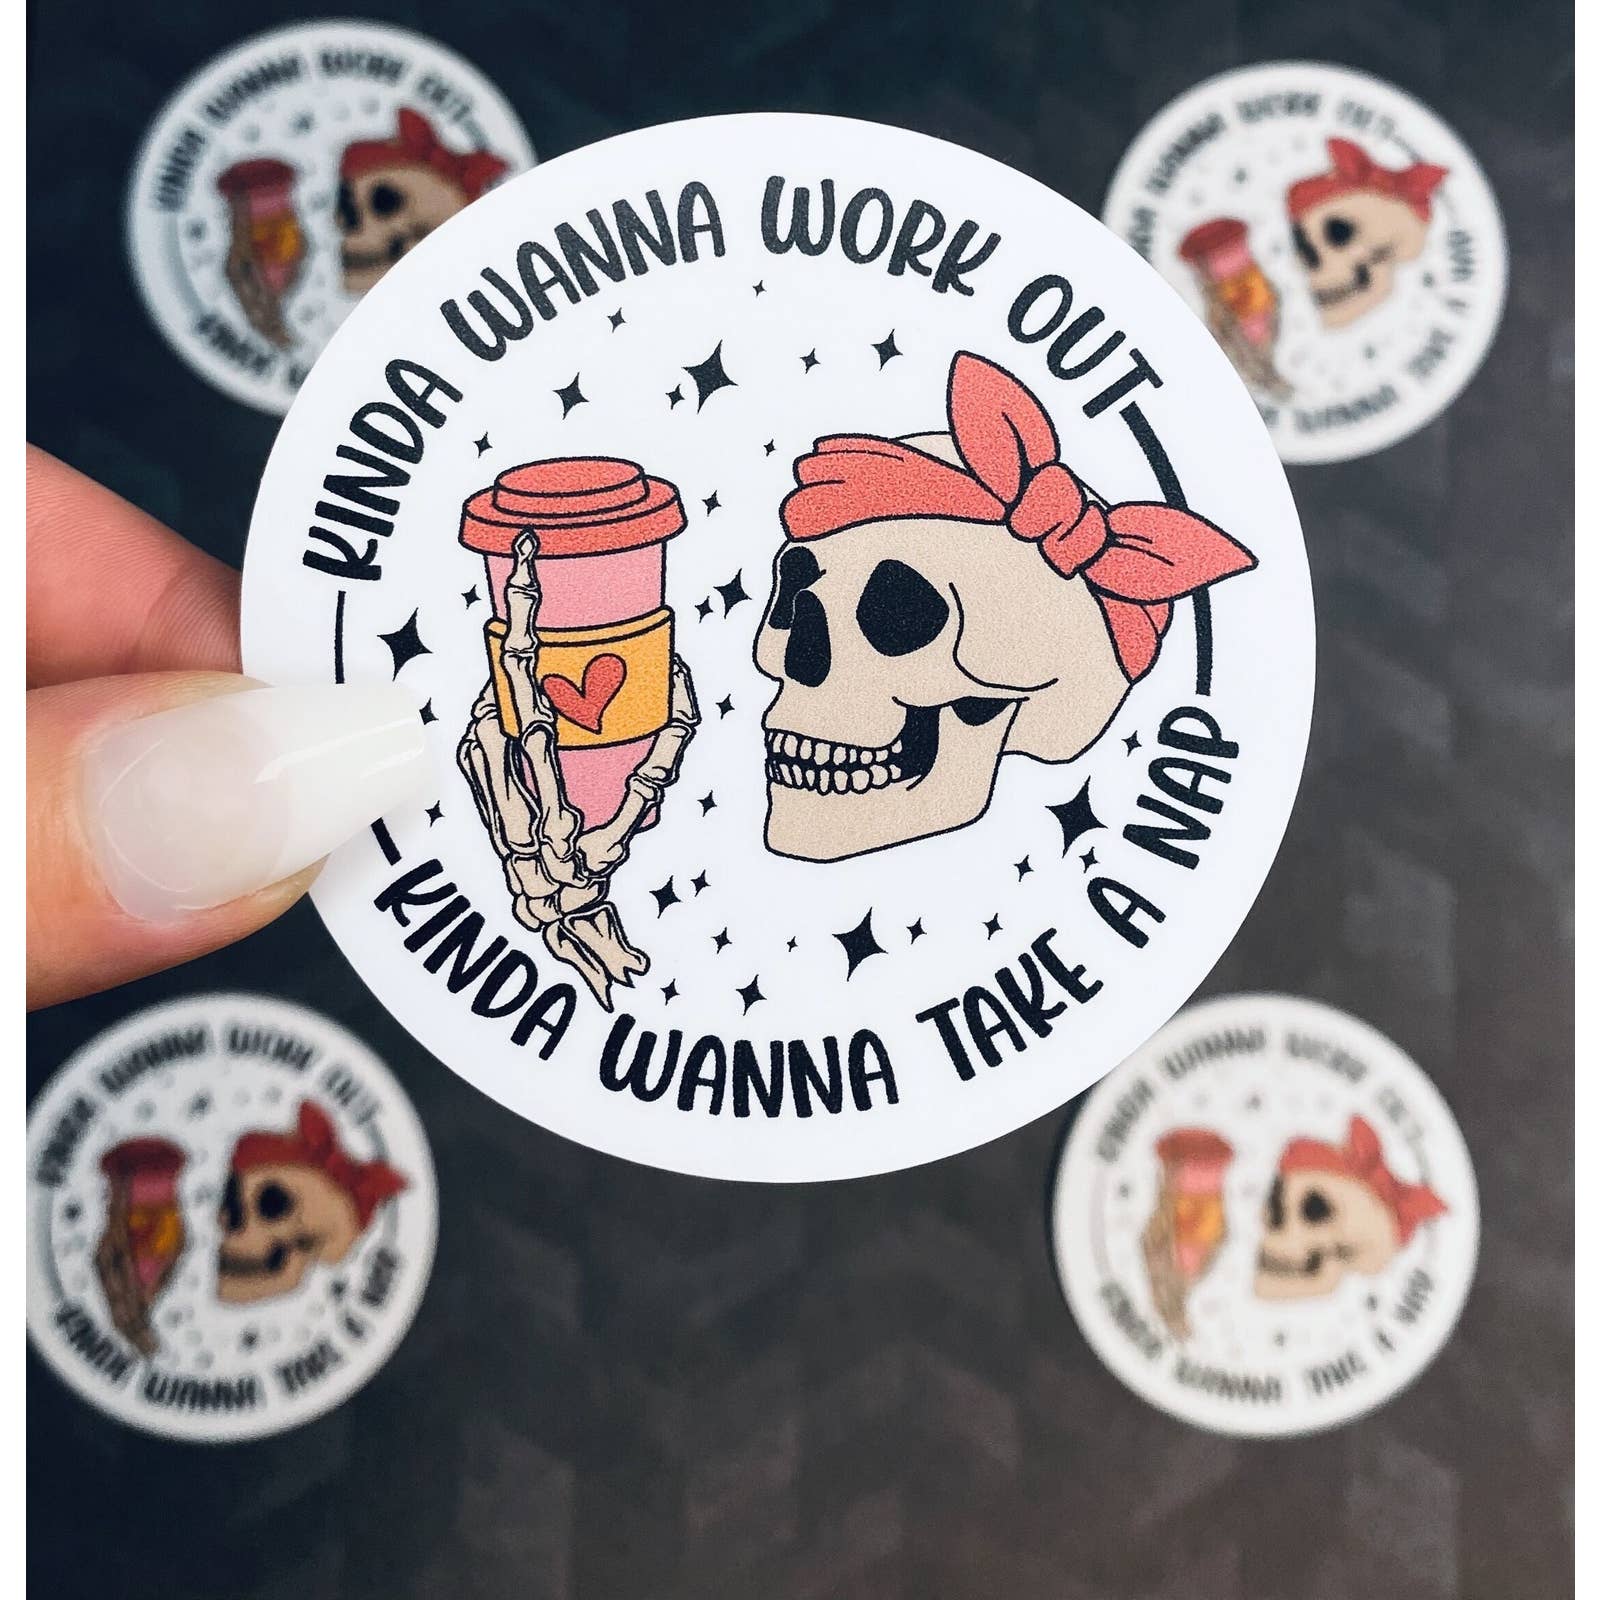 Workout Sticker - Kinda Wanna Workout, Kinda Wanna Take A Nap - for Gym Water Bottle, Lifters, Weightlifting gift, with coffee, skull